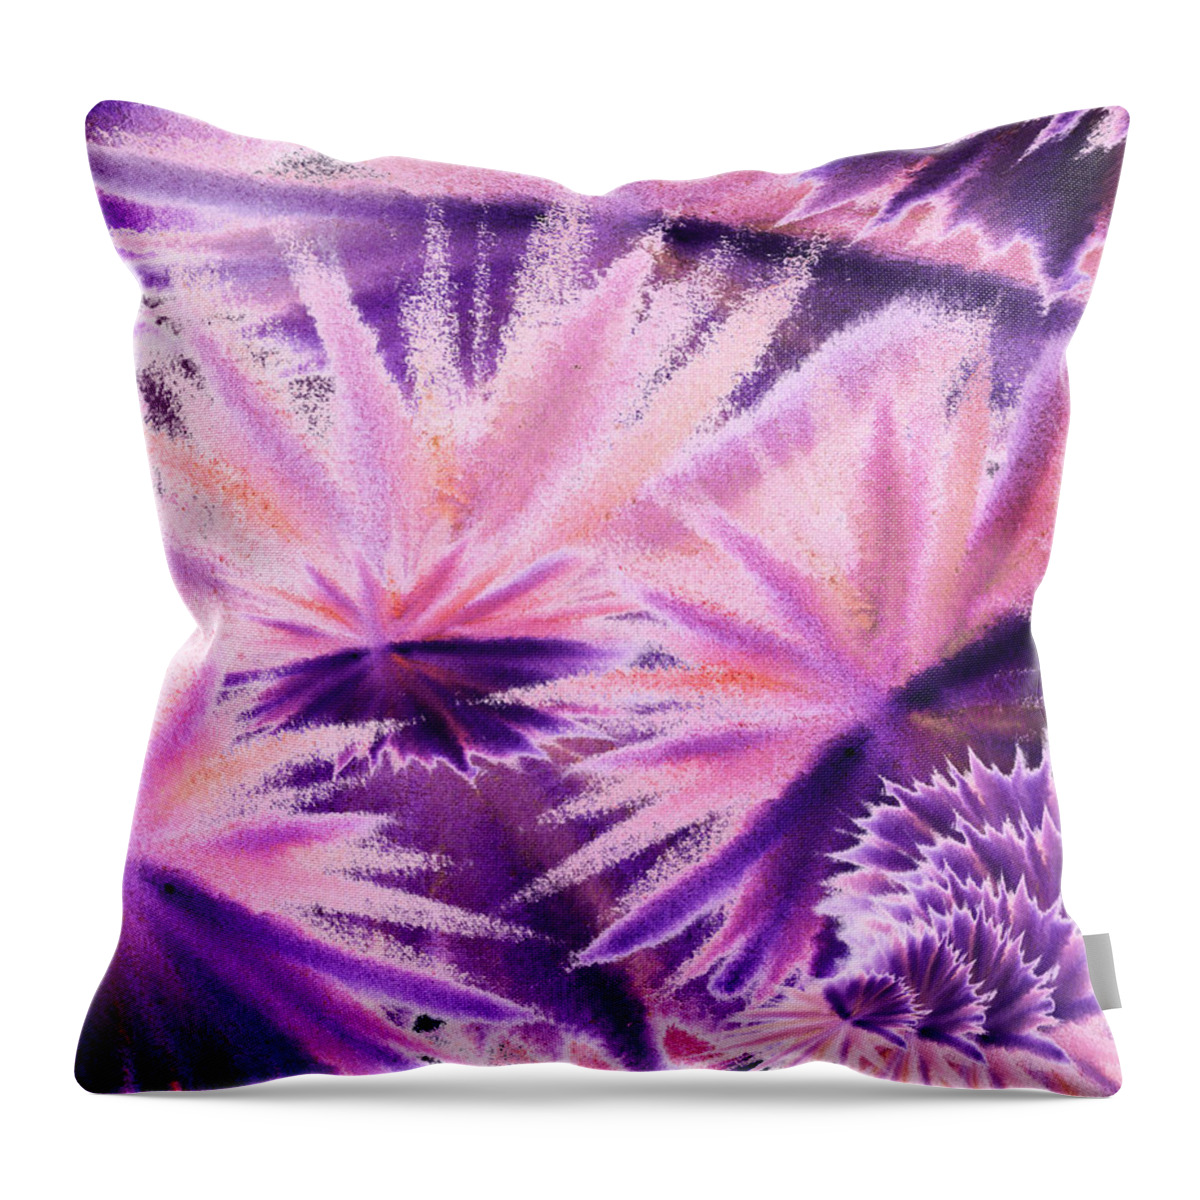 Abstract Throw Pillow featuring the painting Abstract Purple Flowers by Irina Sztukowski